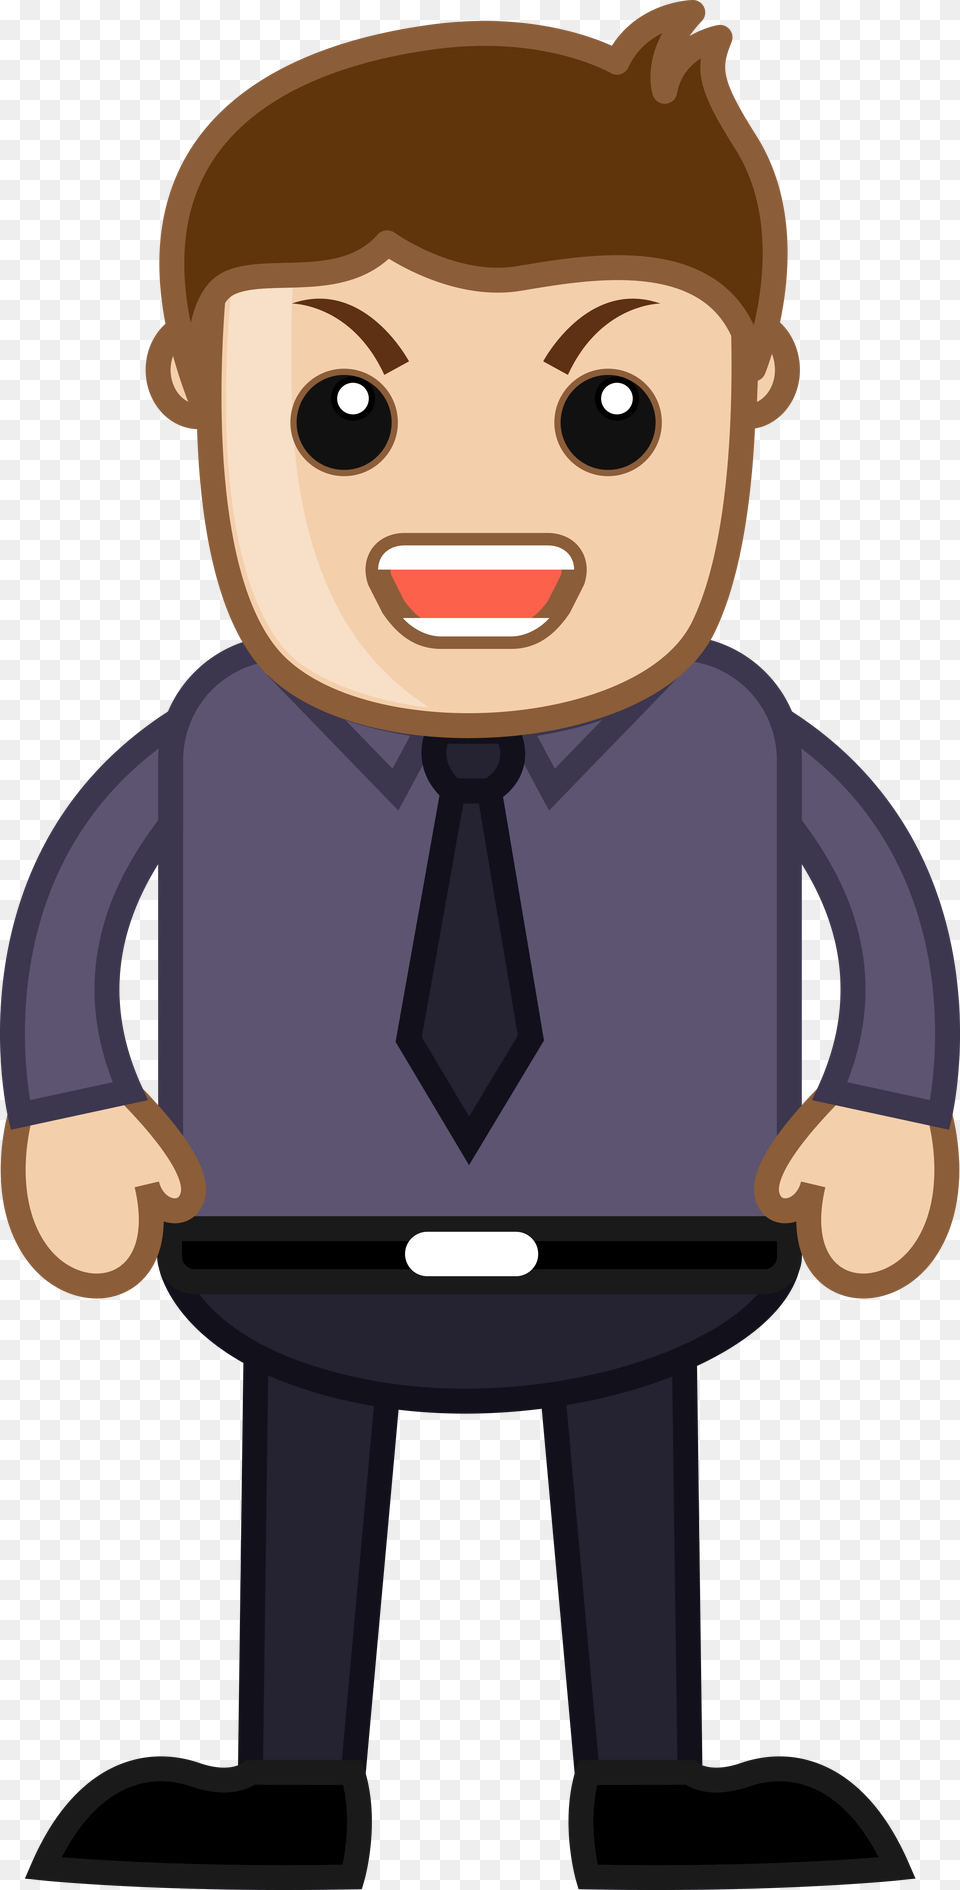 Angry Man Angry Man Office Corporate Cartoon People Angry Cartoon Person, Formal Wear, Accessories, Baby, Tie Free Transparent Png